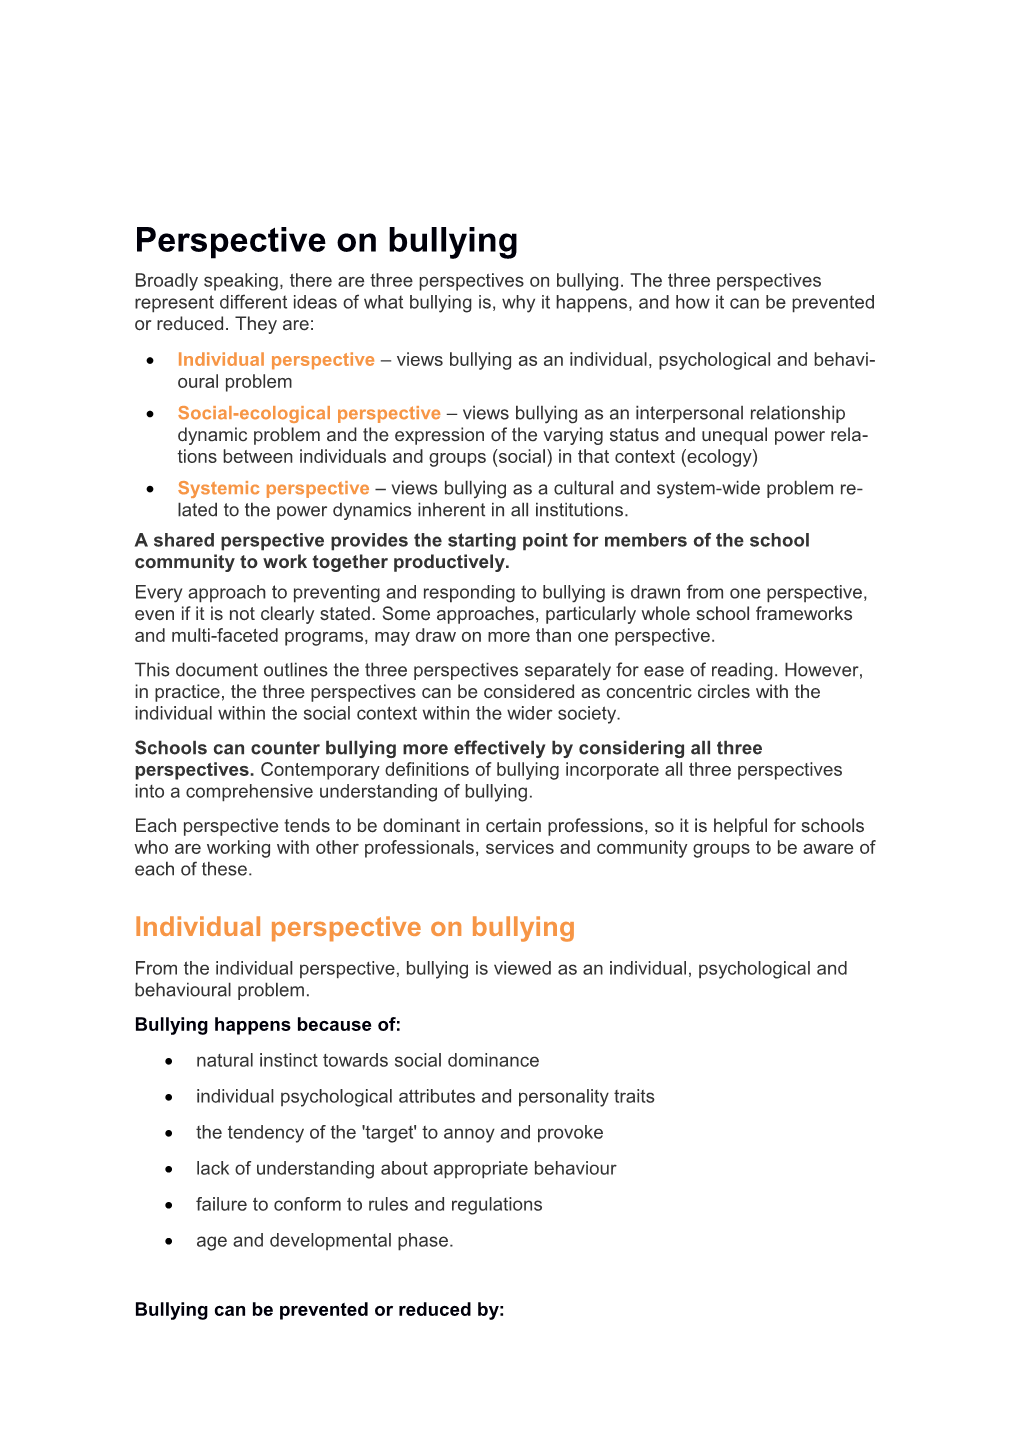 Perspective on Bullying